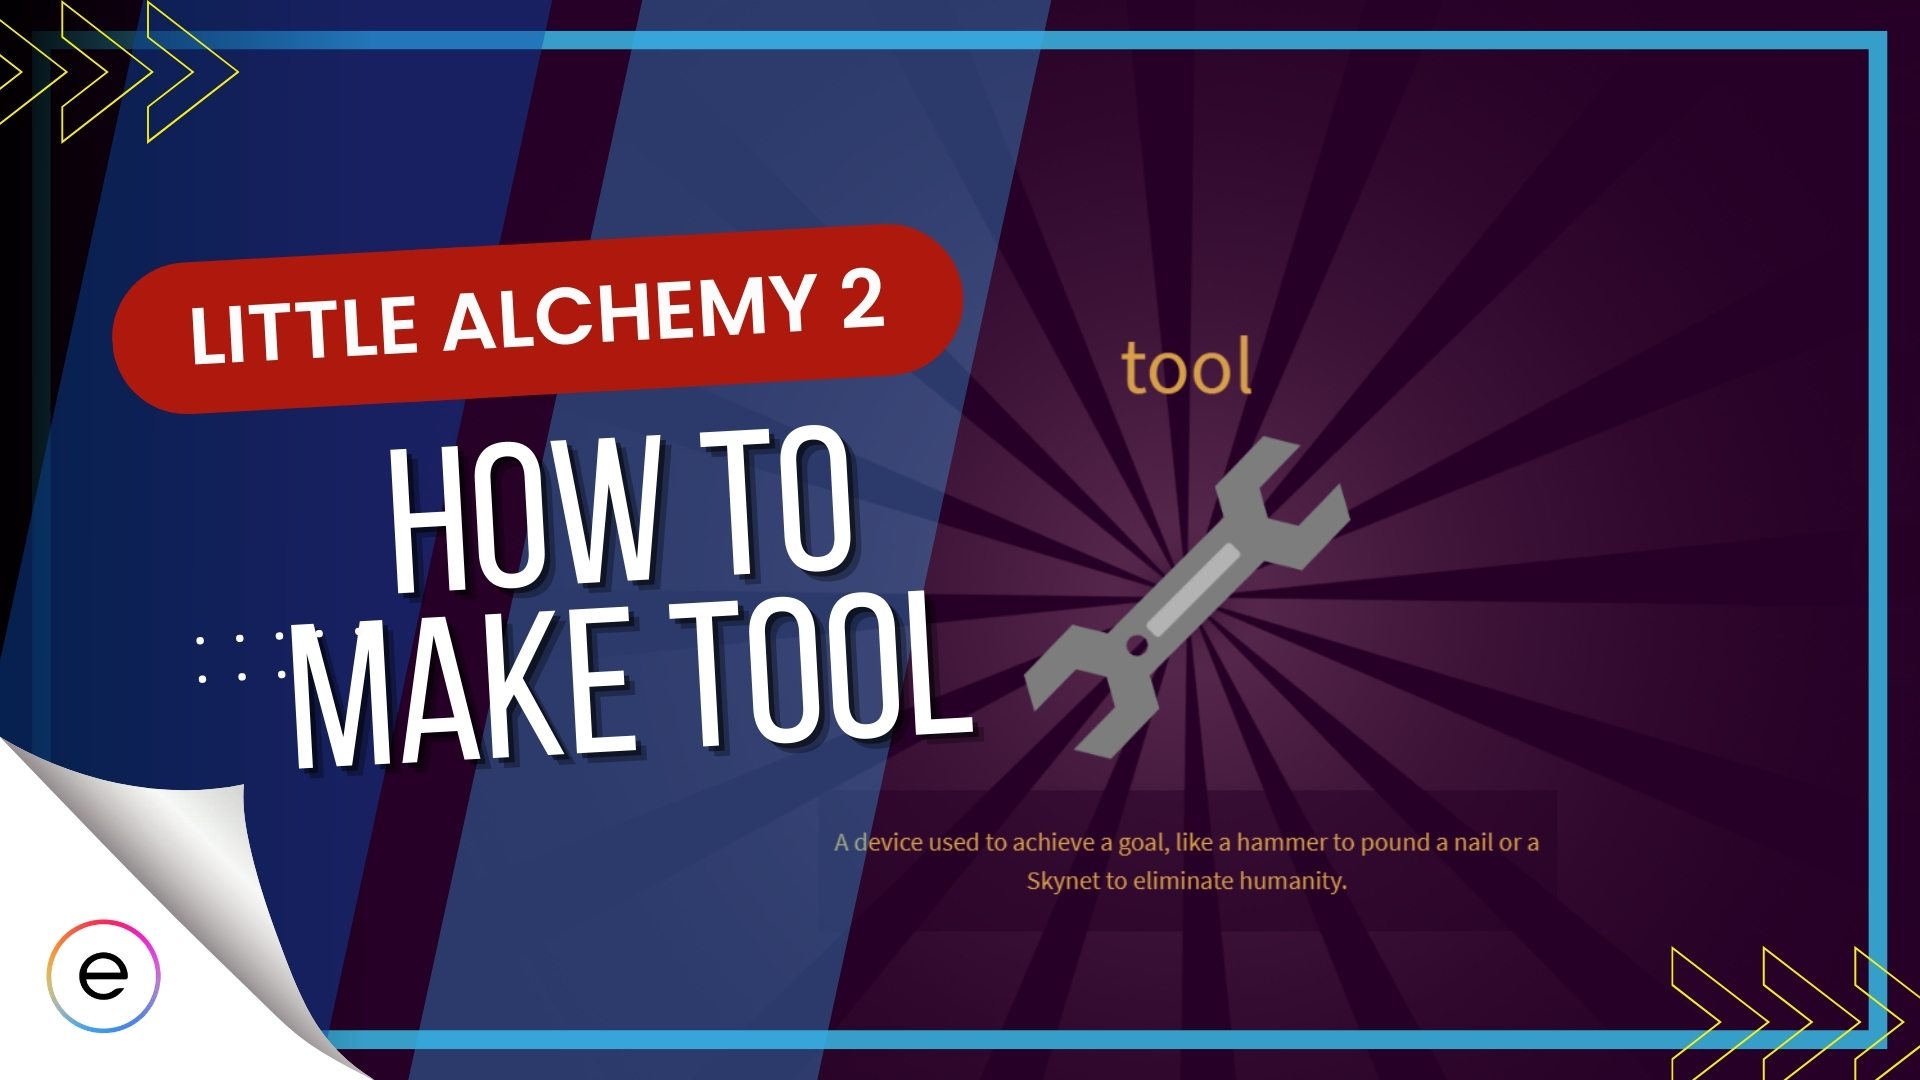 How to Make Tool in Little Alchemy 2 (Step-by-Step Guide) -  𝐂𝐏𝐔𝐓𝐞𝐦𝐩𝐞𝐫